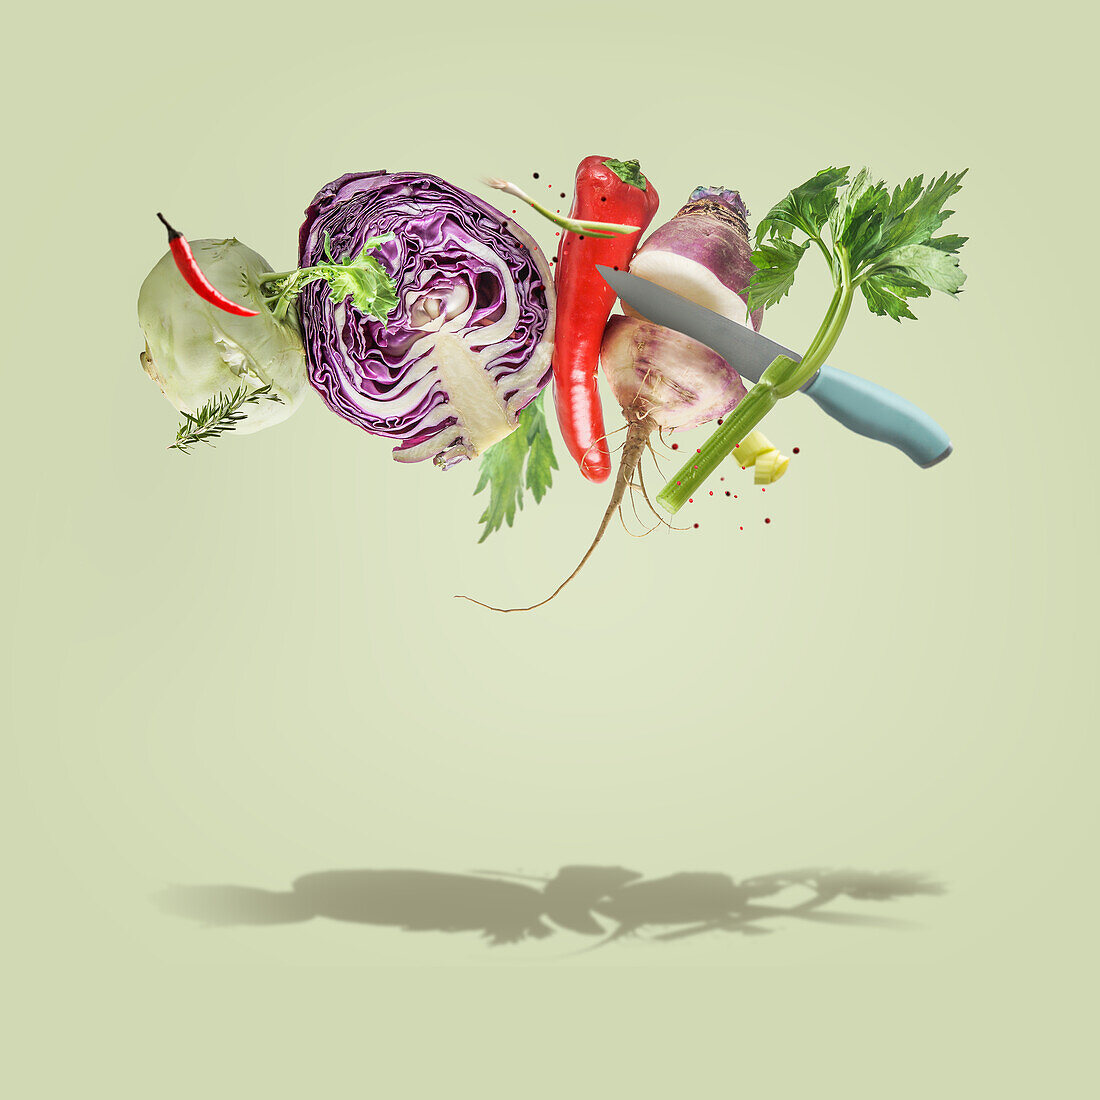 Creative food levitation concept with flying various colorful vegetables and knife at pale green background. Healthy lifestyle